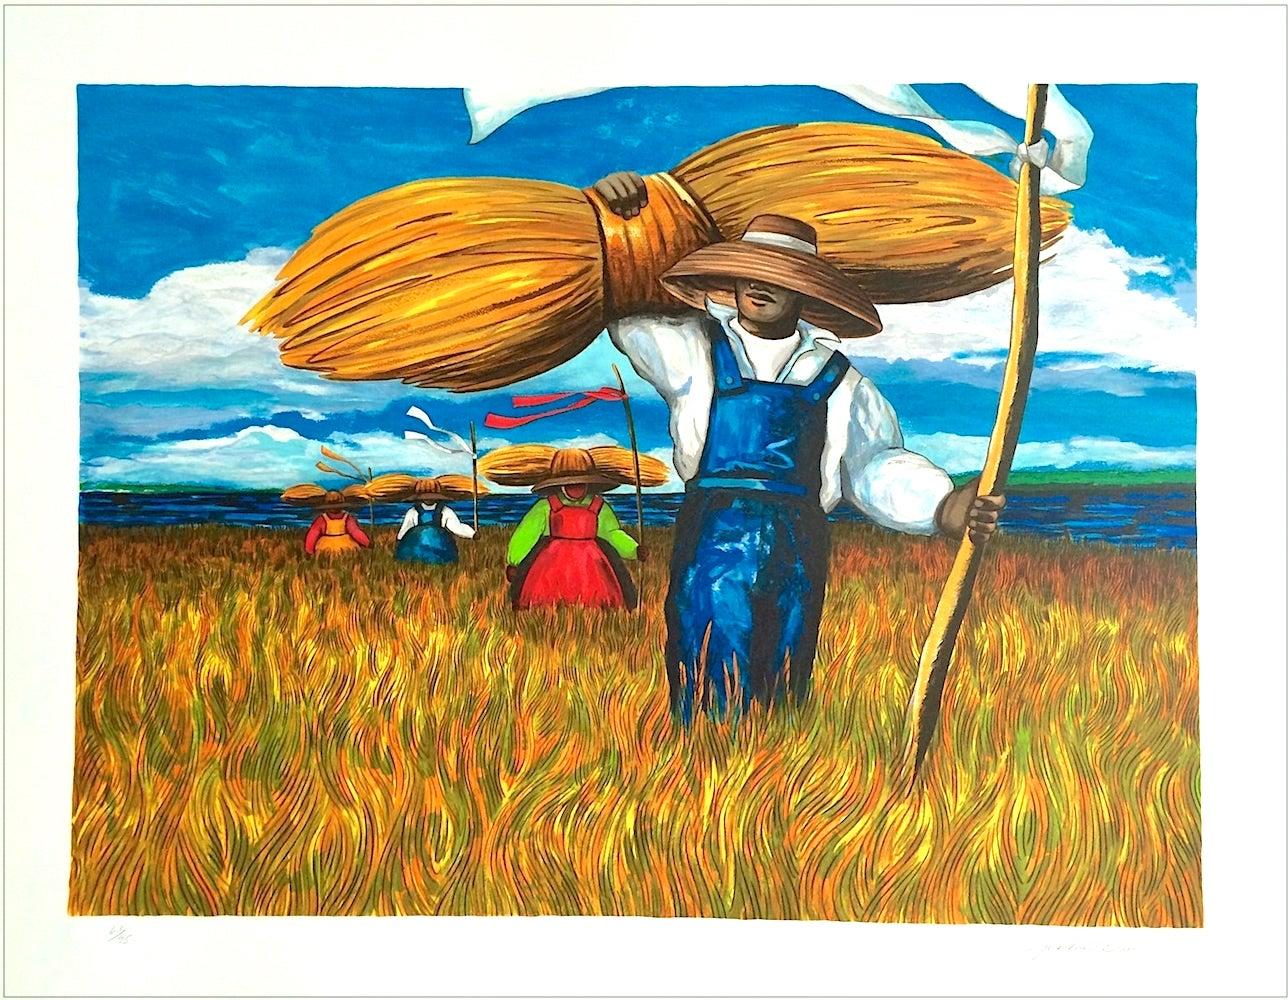 SWEETGRASS CARRIERS Signed Lithograph, South Carolina Lowcountry, Gullah Culture - Print by Jonathan Green